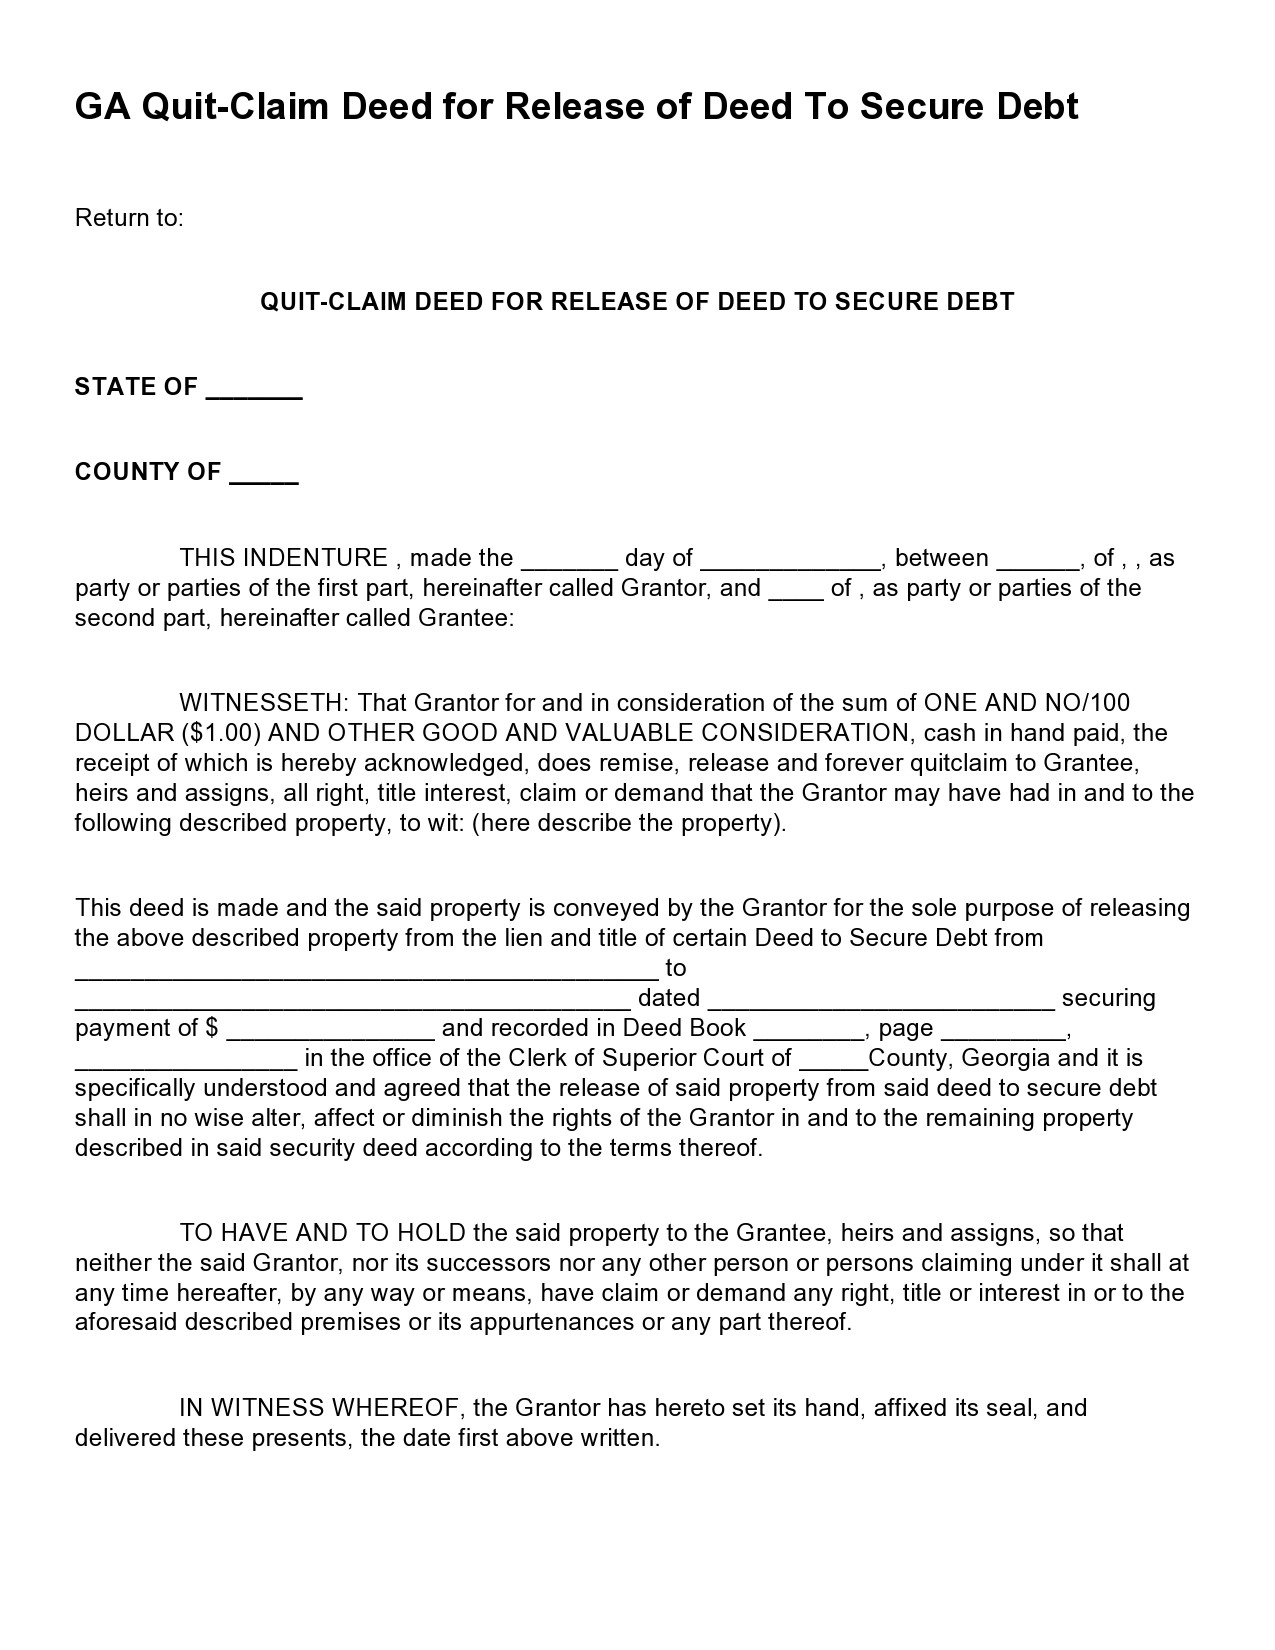 Free quit claim deed form 32